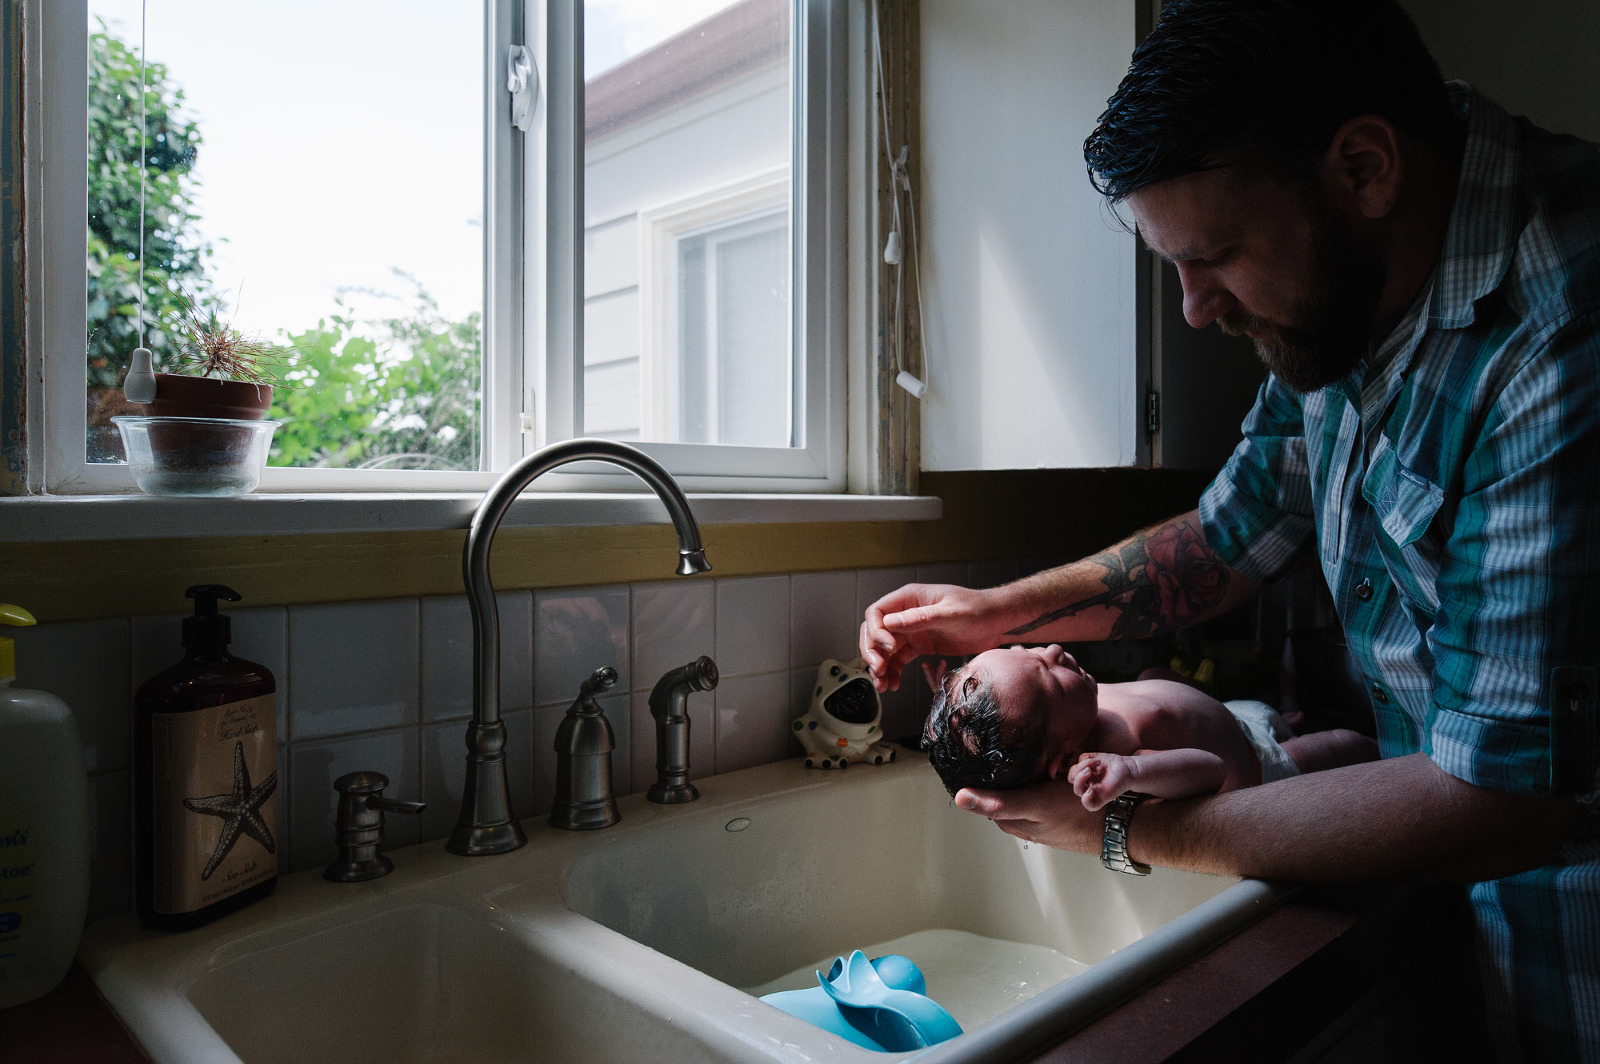 father gives baby sink bath